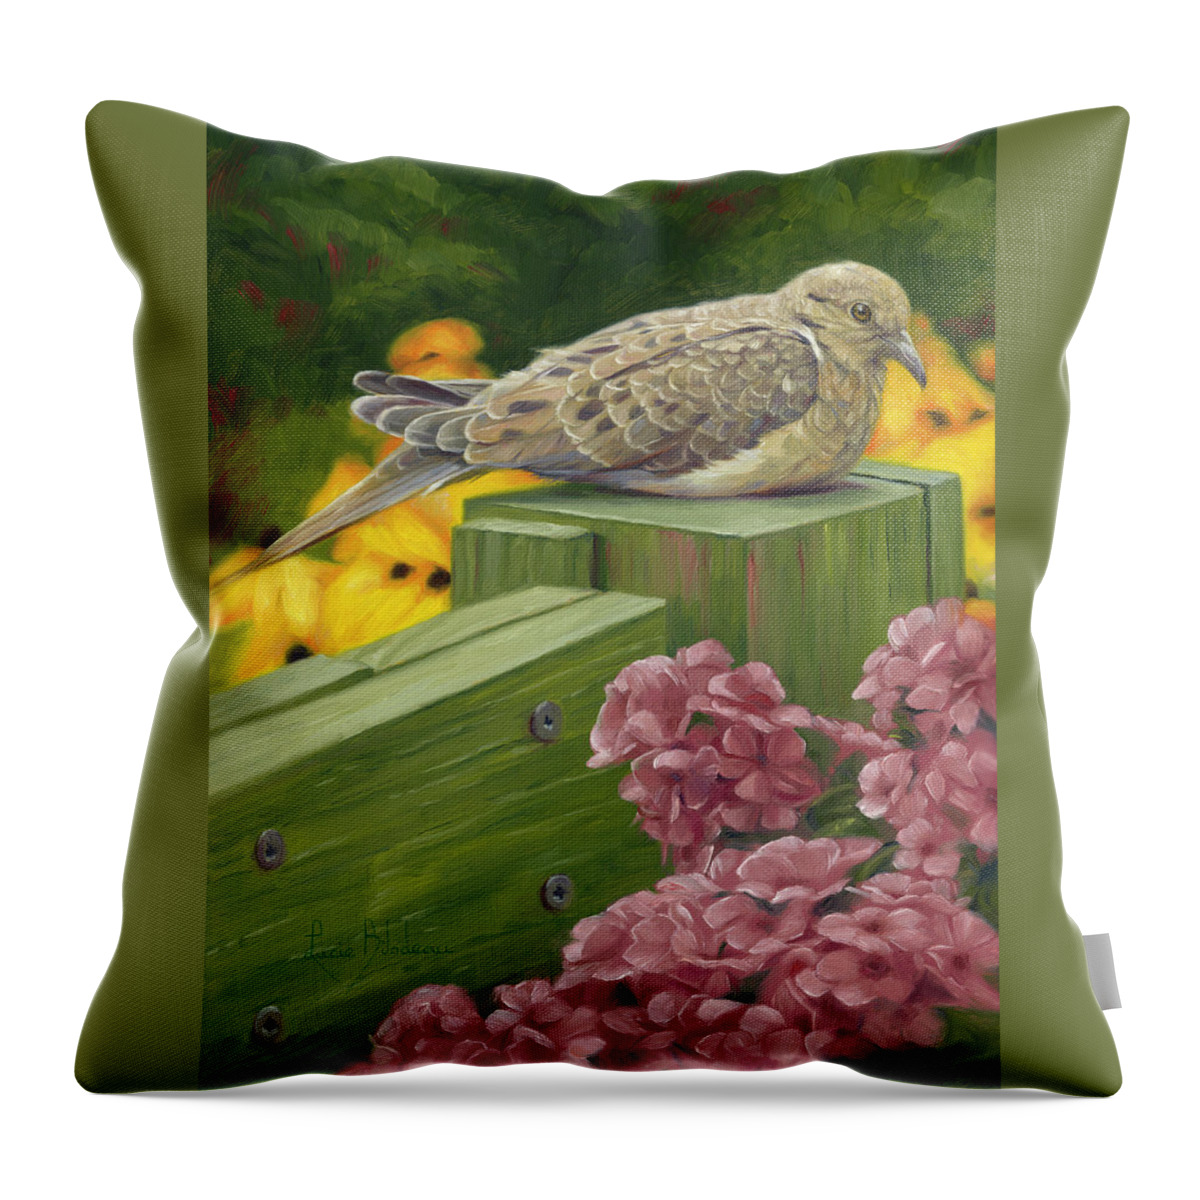 Mourning Dove Throw Pillow featuring the painting Milo by Lucie Bilodeau